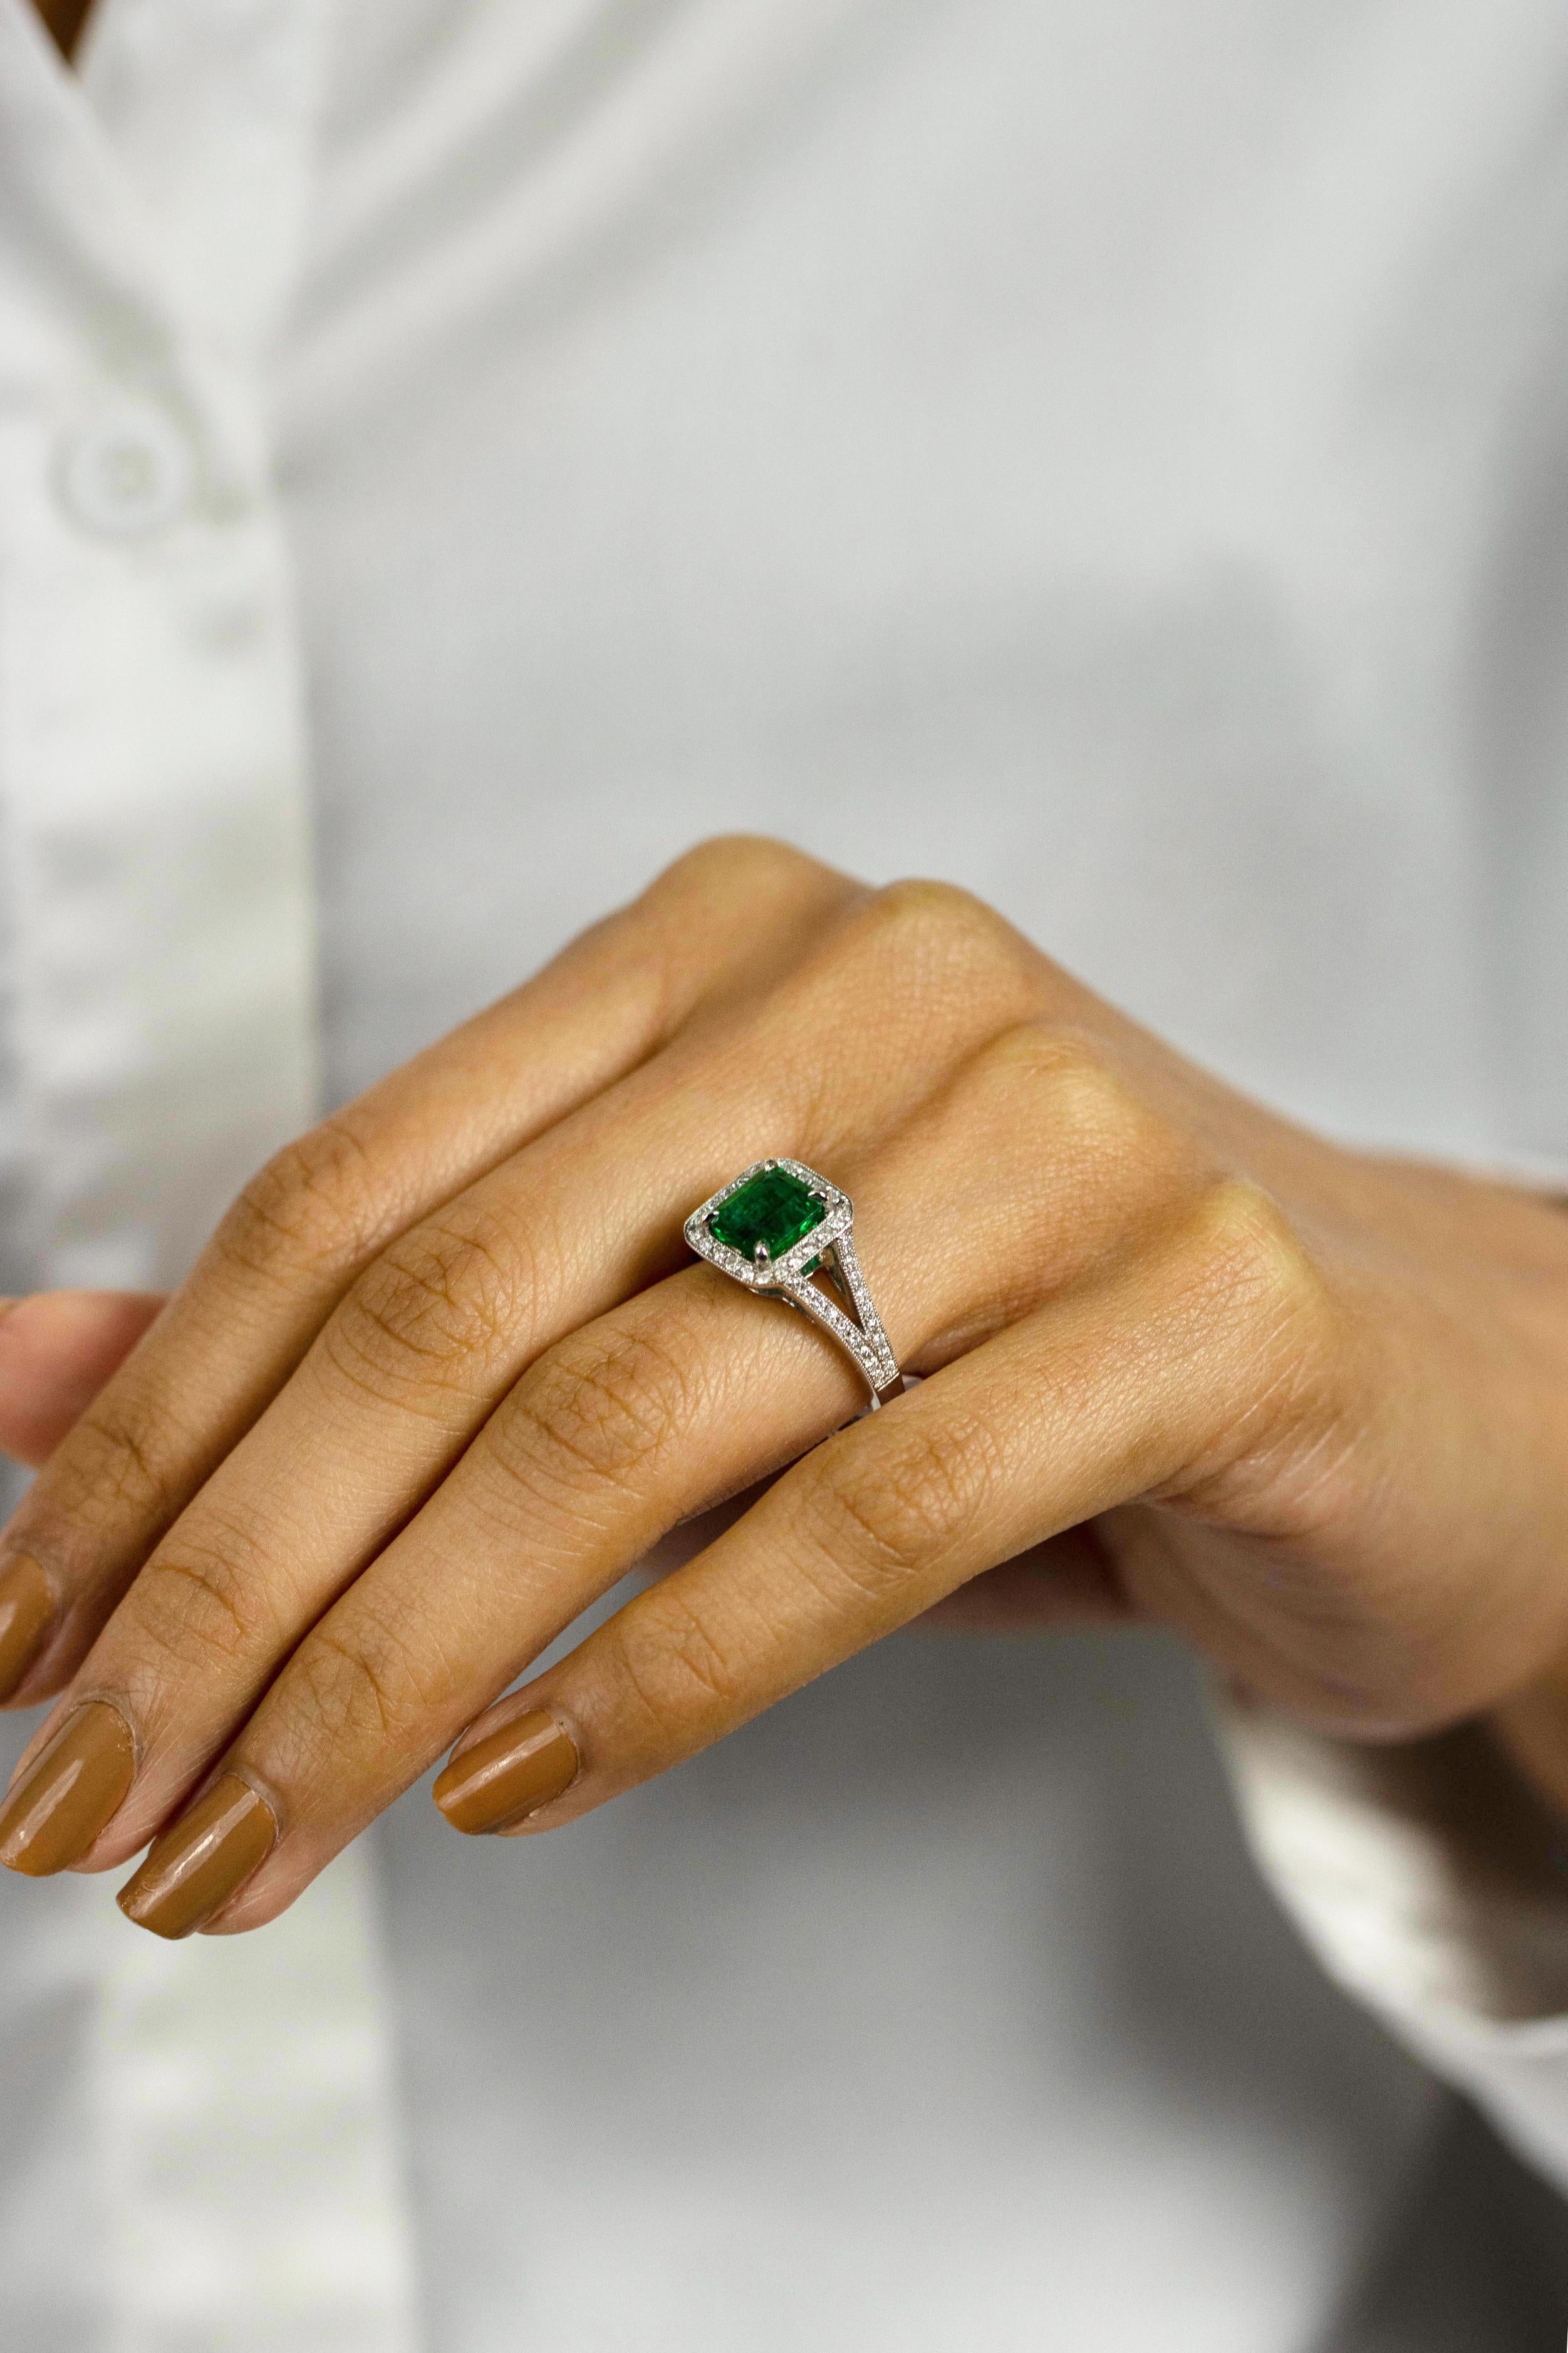 Roman Malakov 1.68 Carats Emerald Cut Emerald with Diamond Halo Engagement Ring In New Condition For Sale In New York, NY